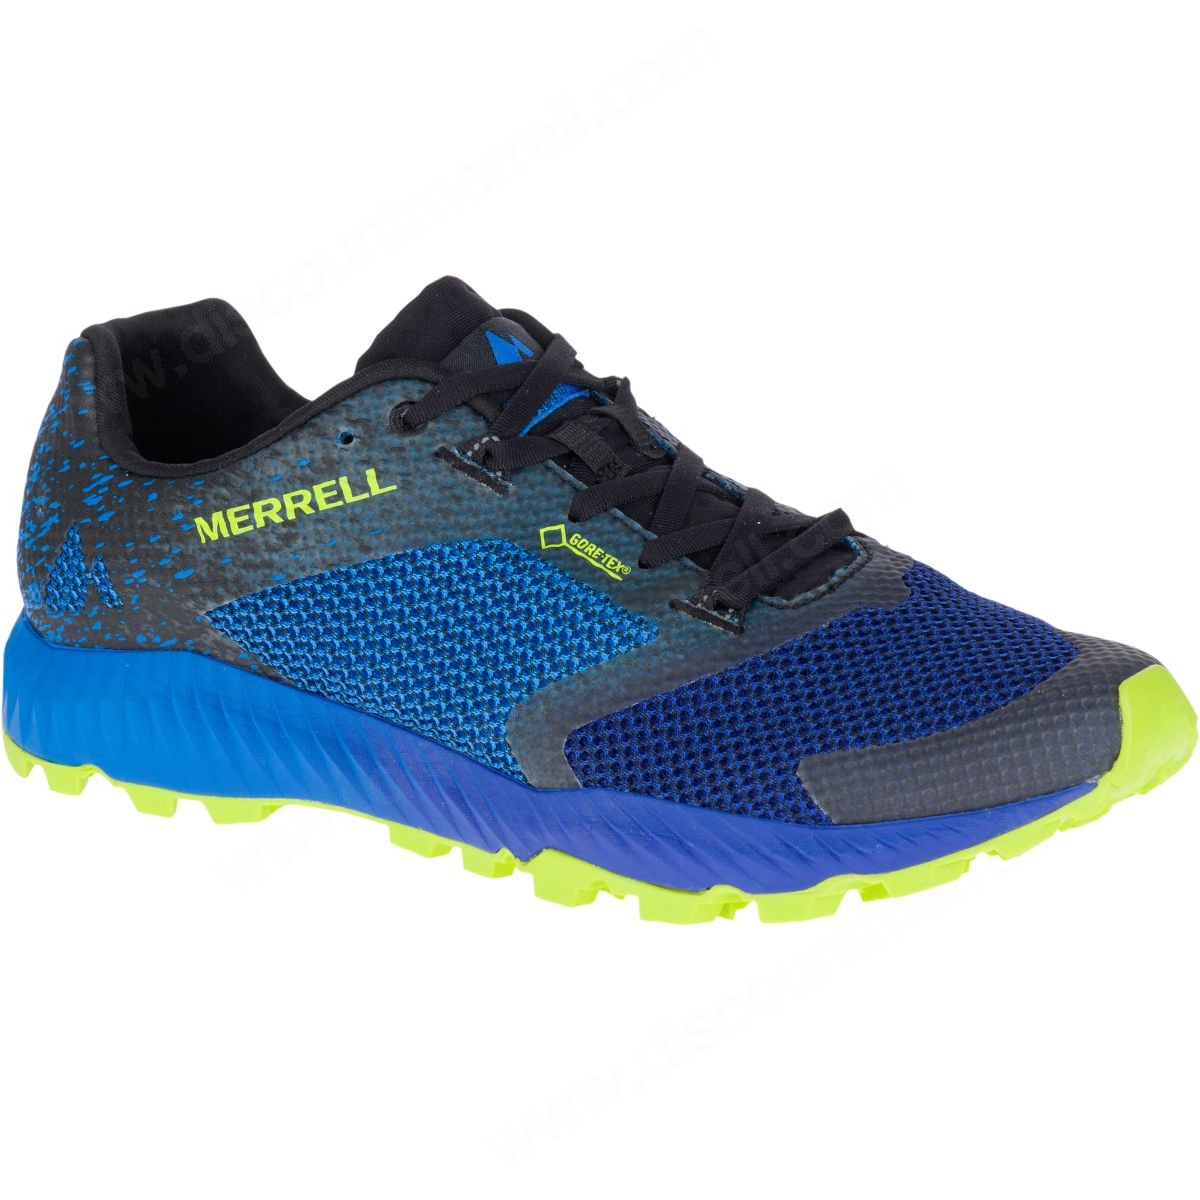 Merrell Man's All Out Crush Gore-Tex® Blueberry - -0